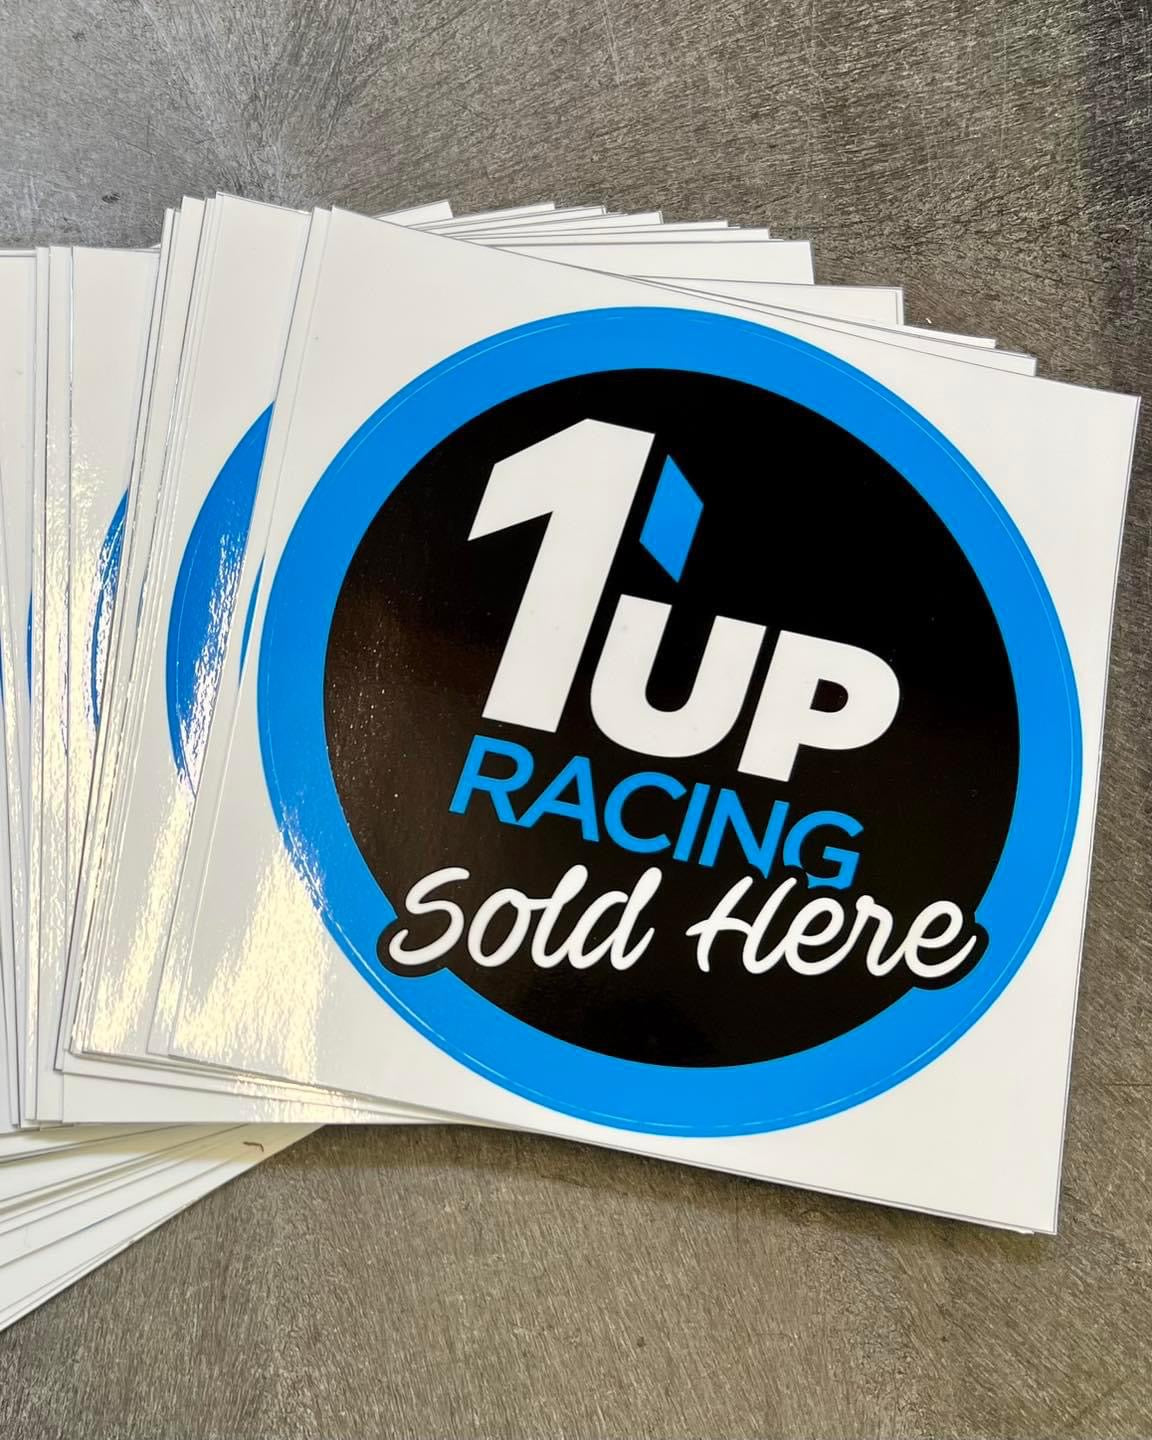 1up Sold here Decals Included with Dealer Orders